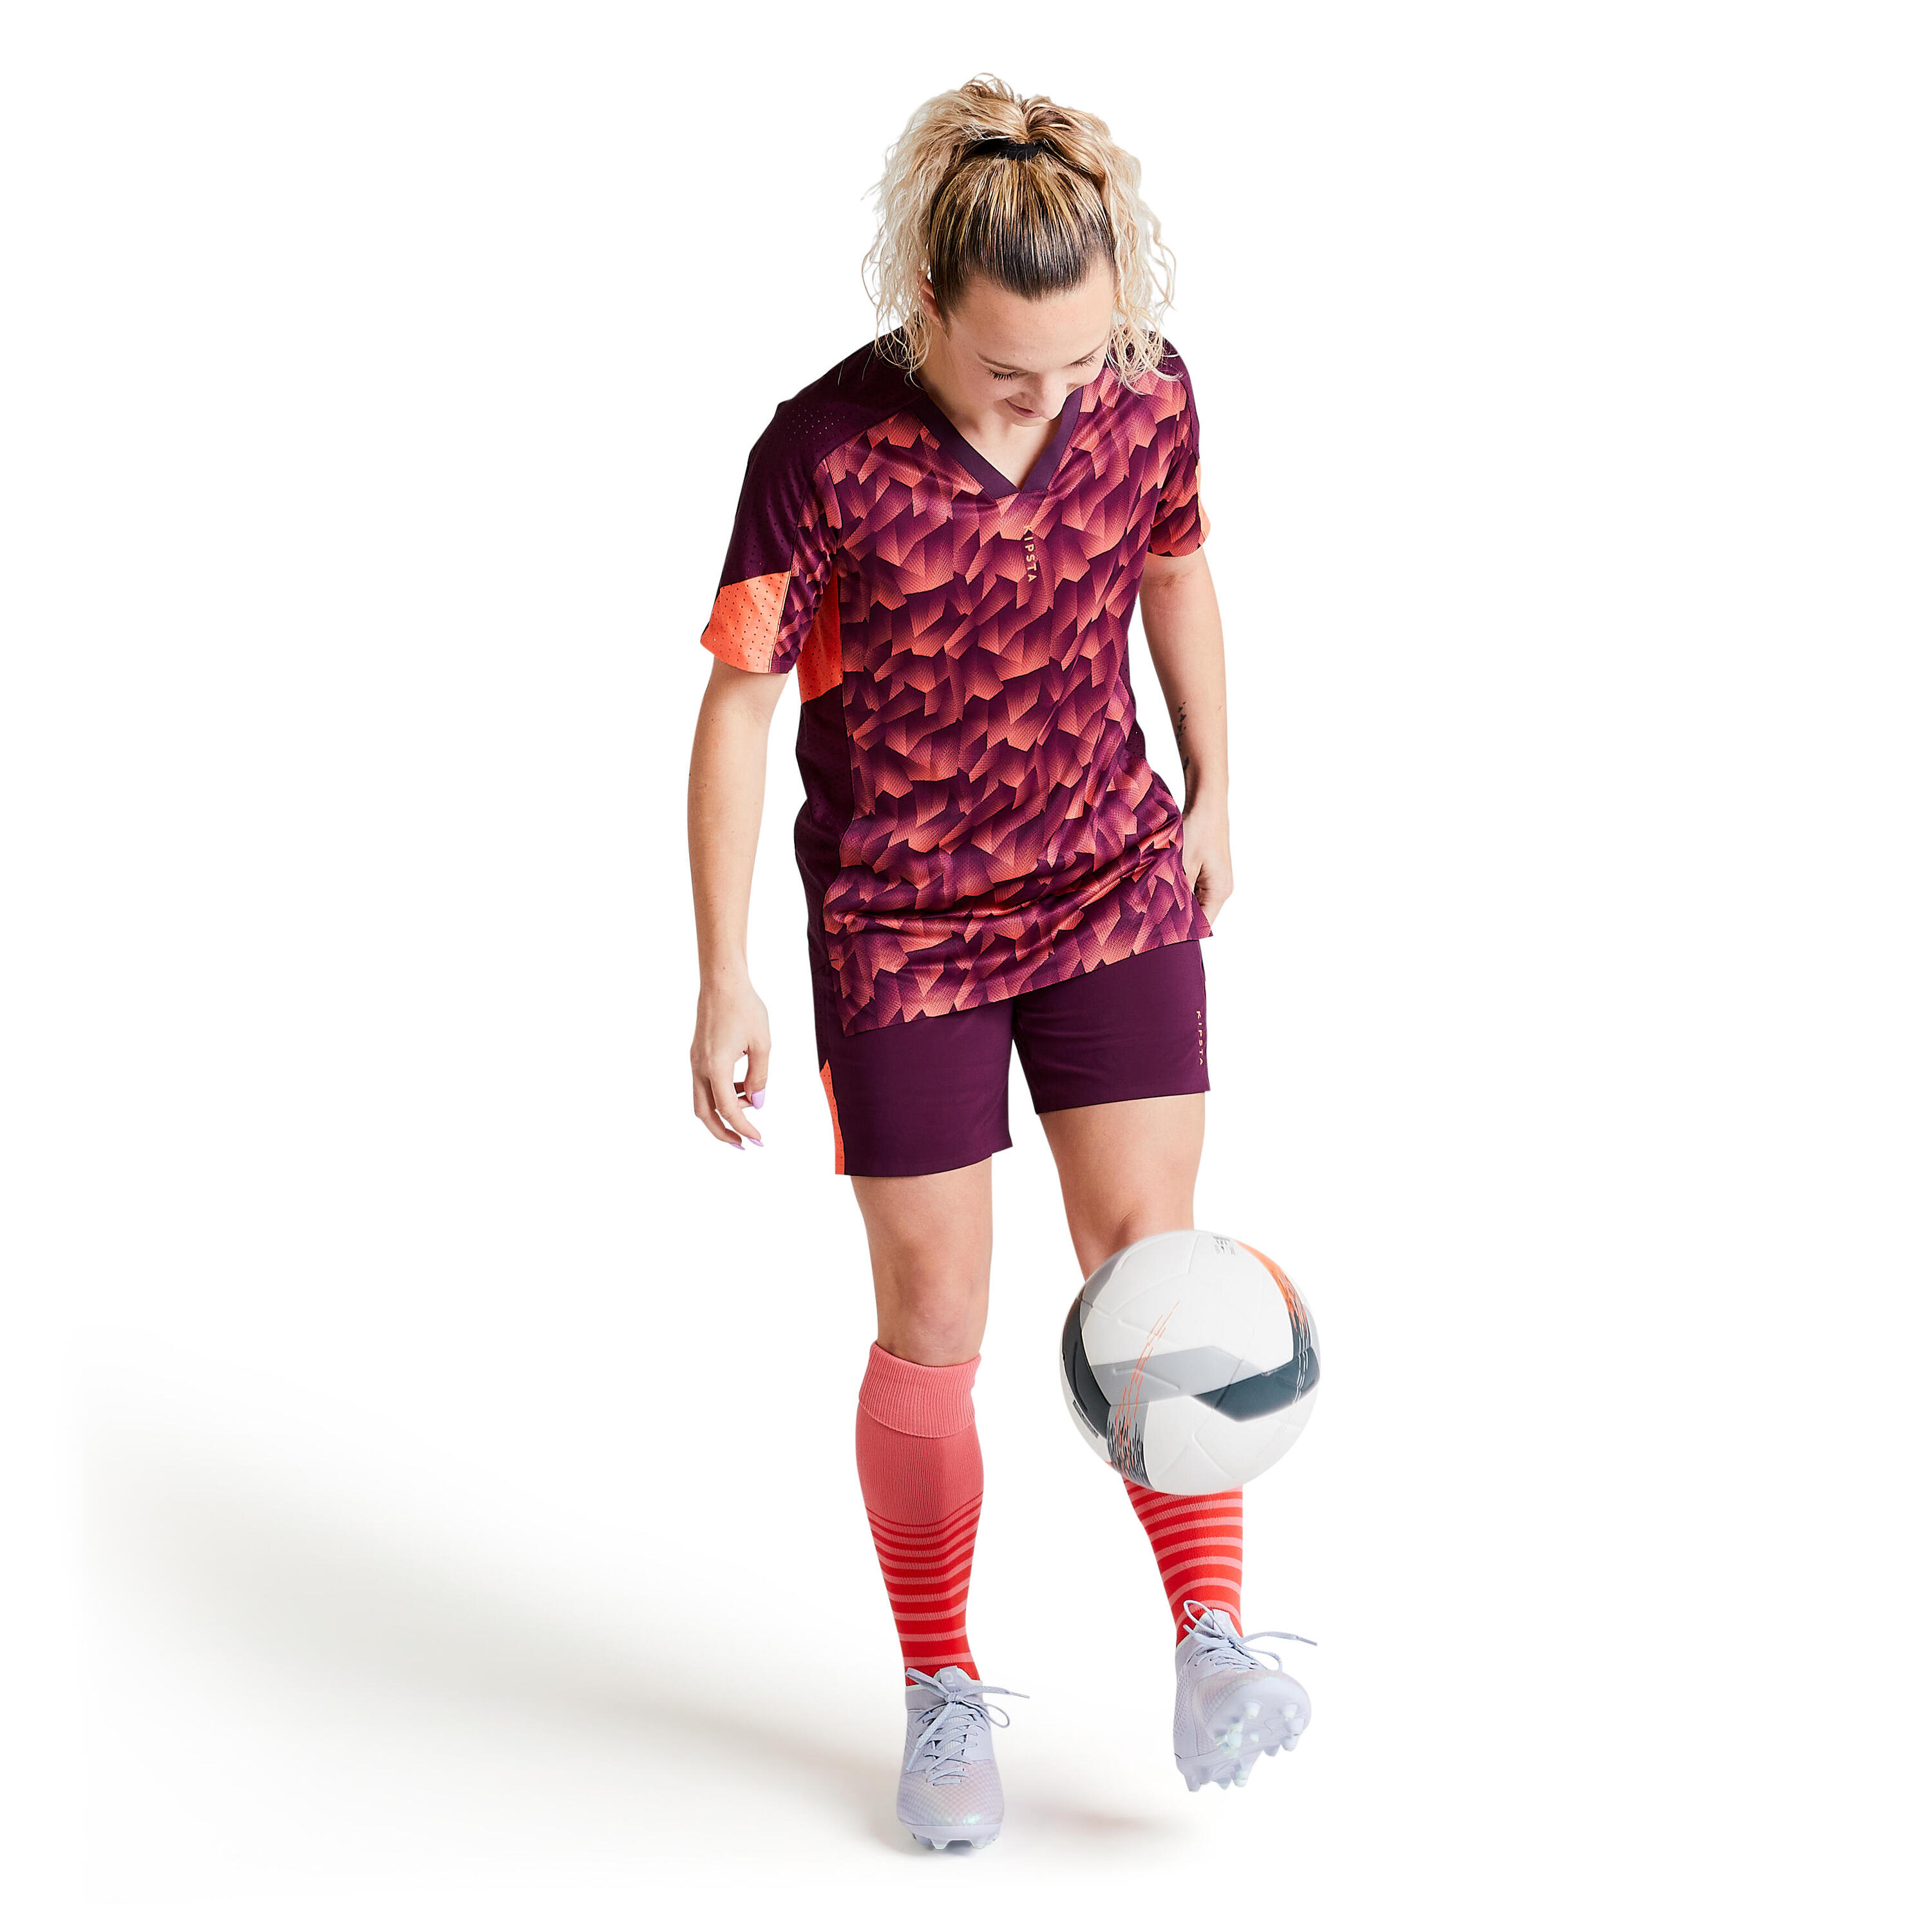 Women's Football Jersey F900 - Coral 27/31